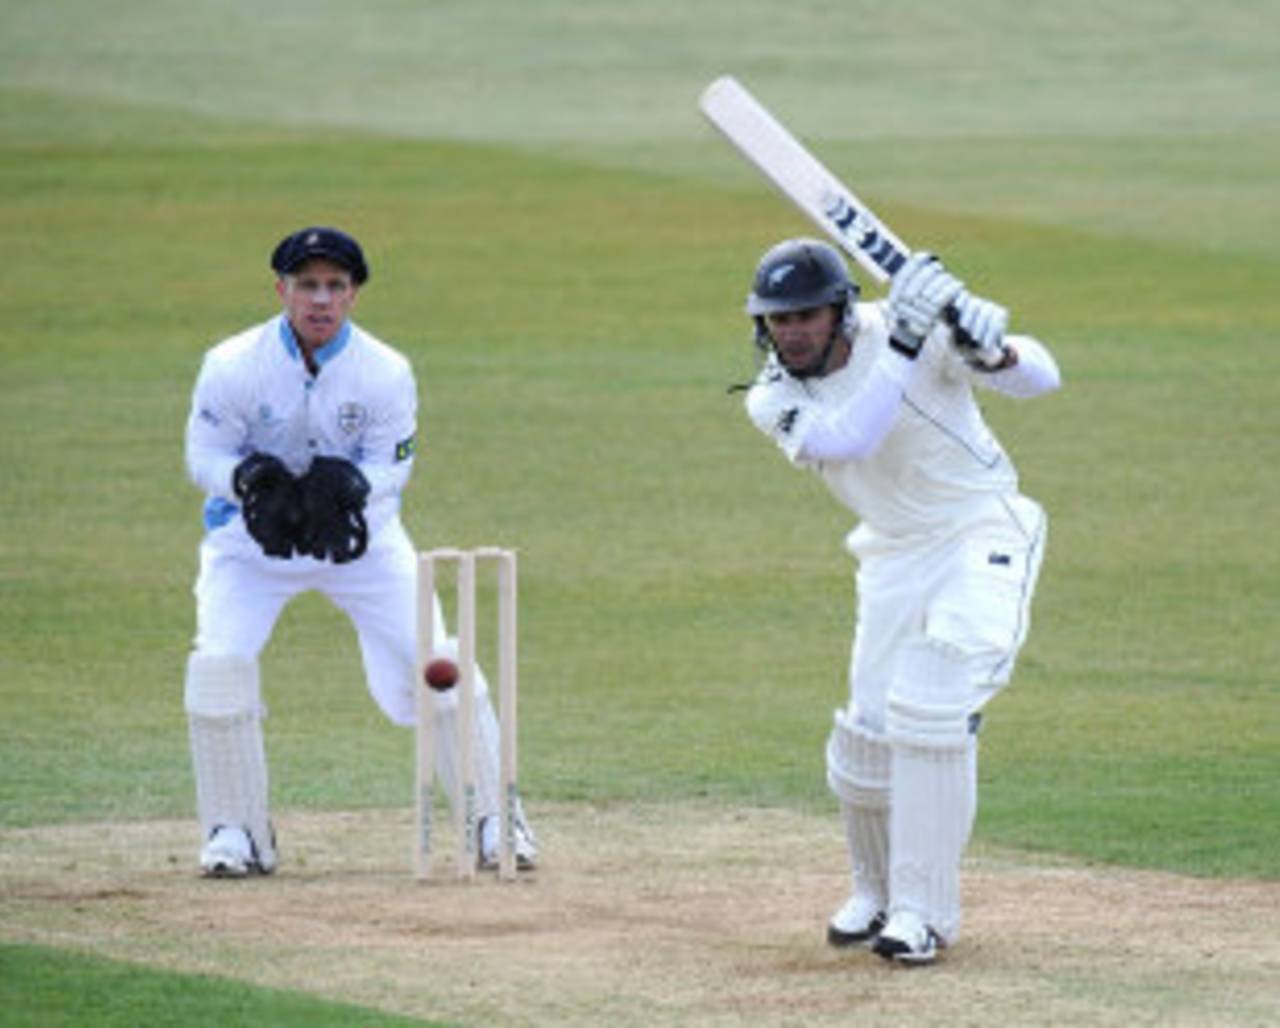 Dean Brownlie goes through the off side during his 71, Derbyshire v New Zealanders, Tour Match, 1st day, Derby, May 4, 2013